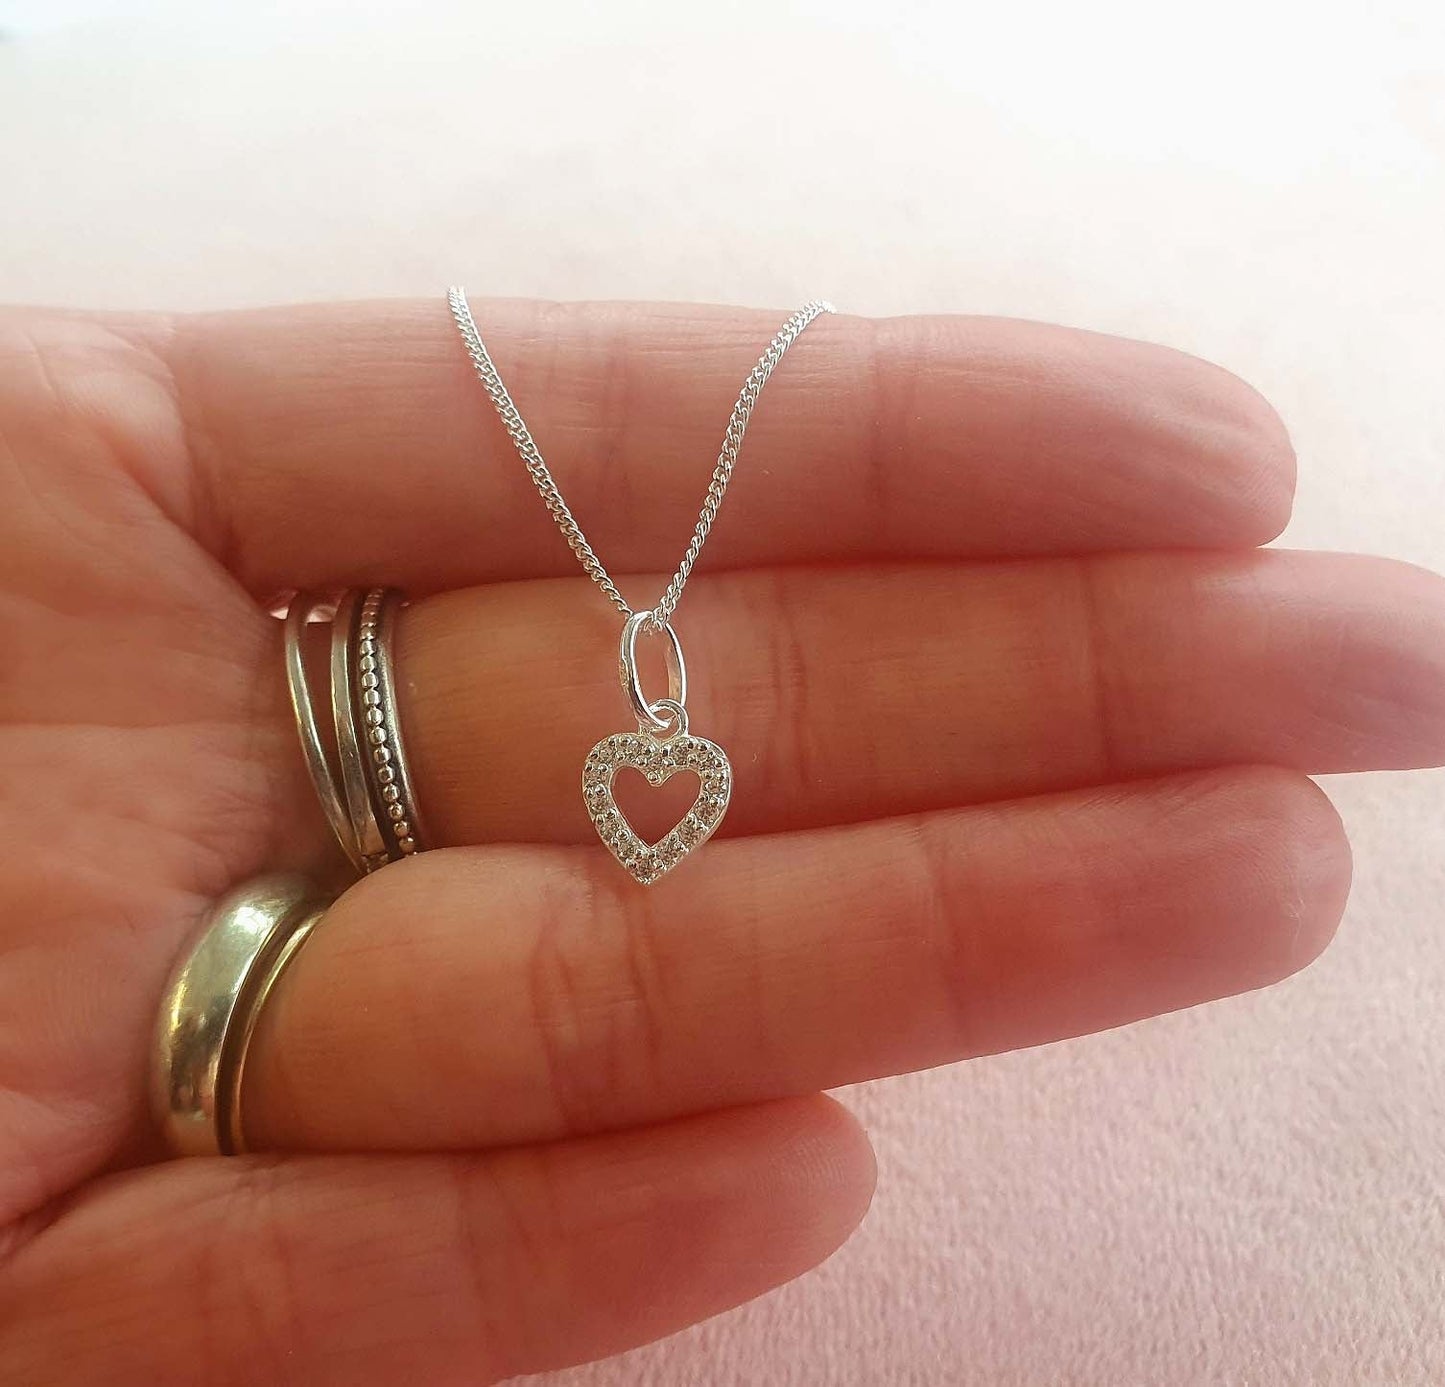 Auntie Heart Necklace with Cubic Zirconia in Sterling Silver 925, Personalised Gift